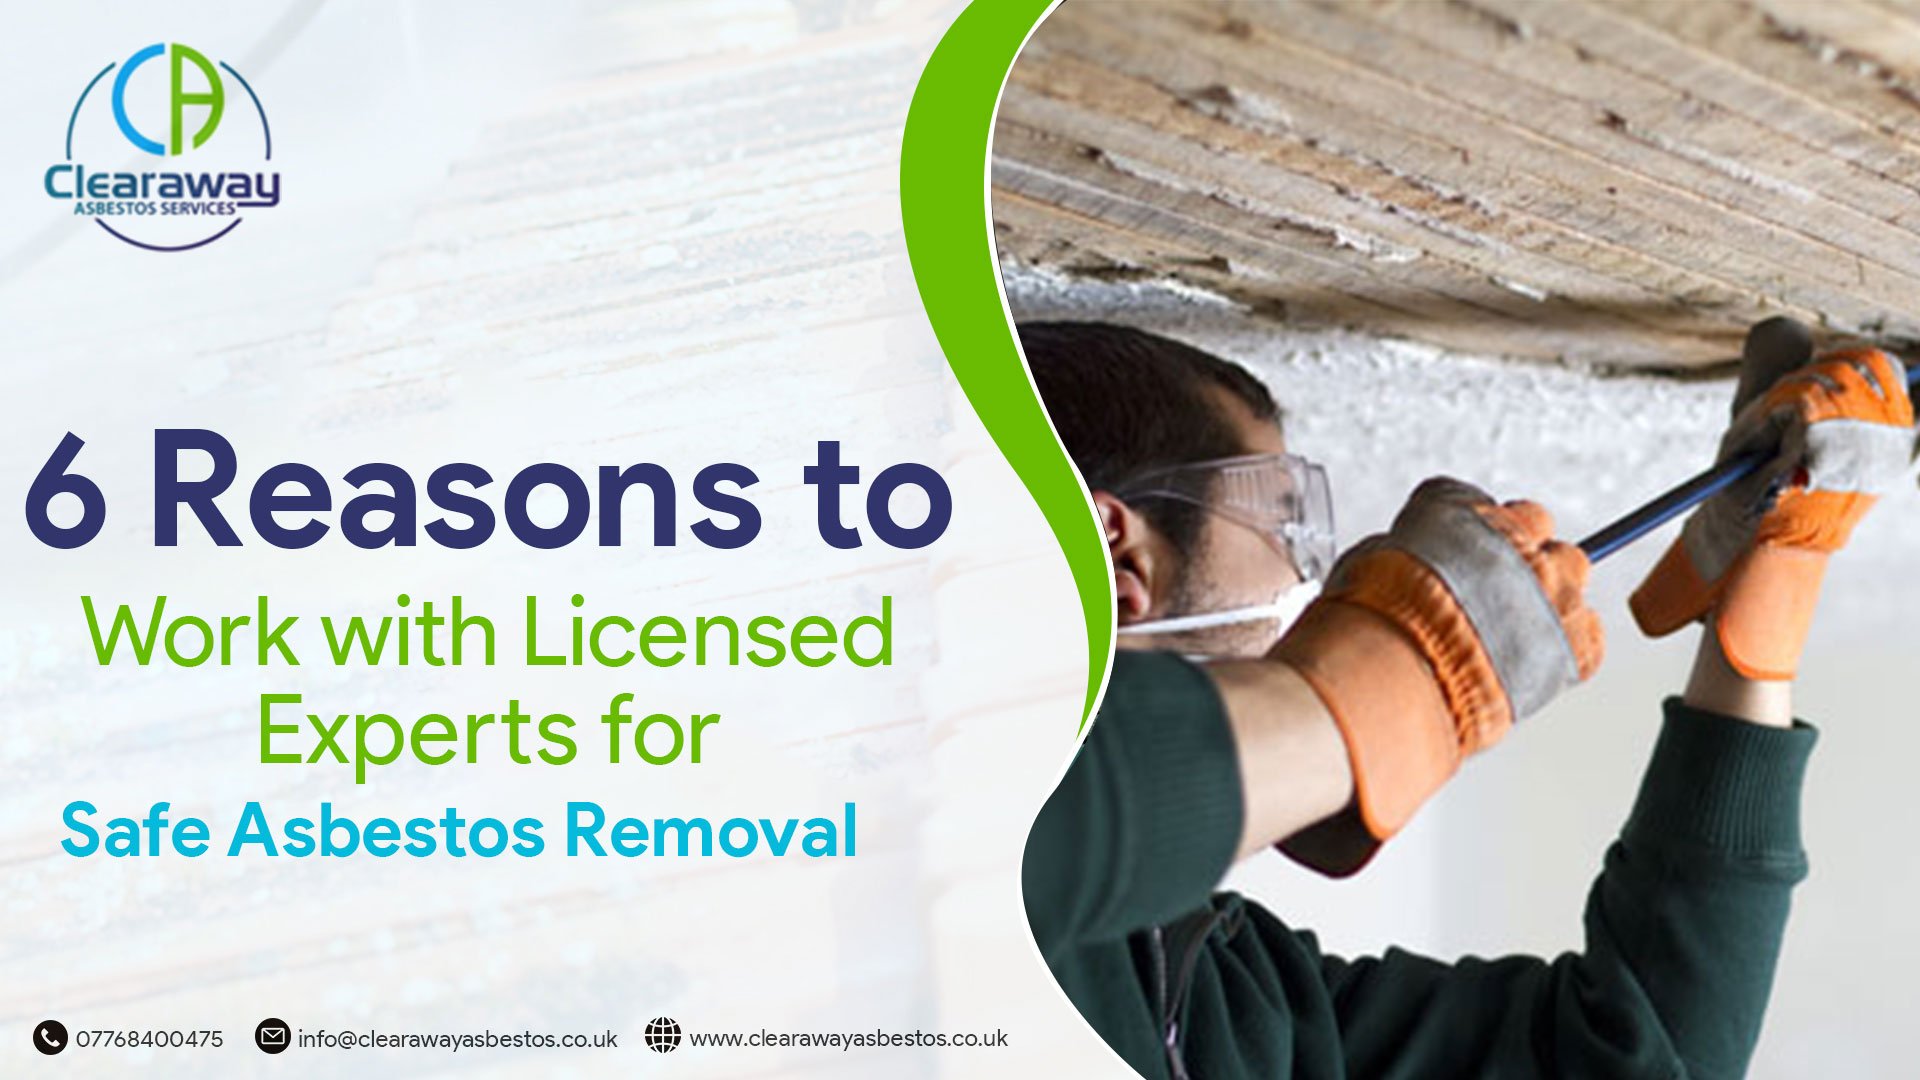 6 Reasons to Work with Licensed Experts for Safe Asbestos Removal